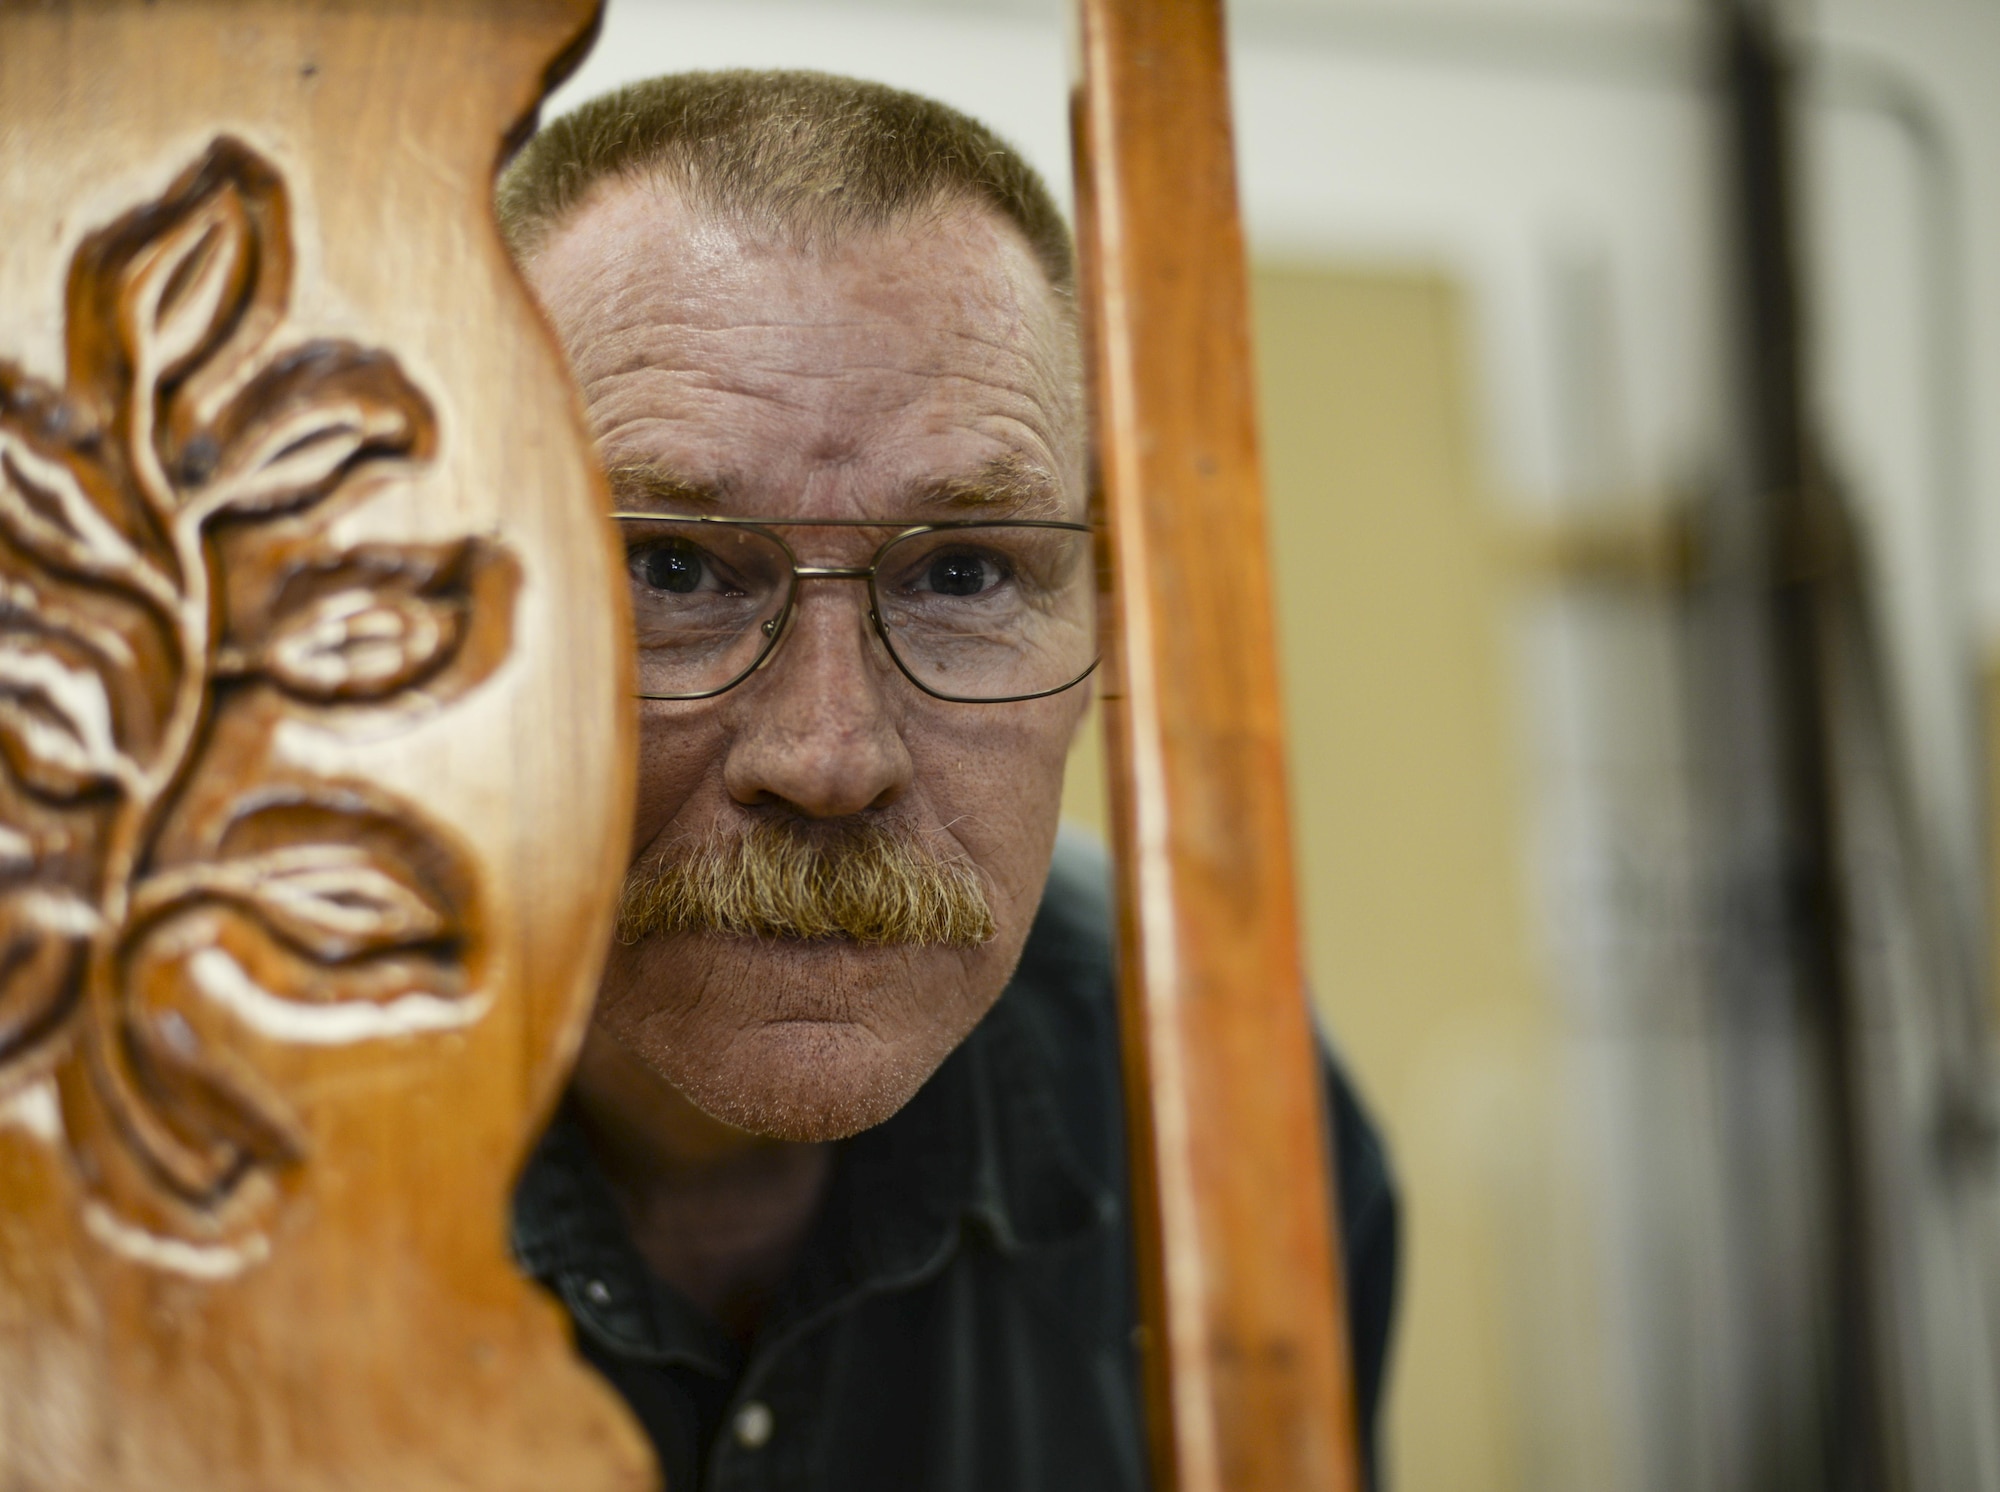 Joe, the 49th Force Support Squadron Wood Shop supervisor, peers between the bars of an antique chair at Holloman Air Force Base, N.M. 9 Aug. 2016. The Arts & Crafts Center houses a Frame Shop, Ceramics Studio, Embroidery Shop, Engraving & Trophy Shop and the Wood Shop. (Last names are being withheld due to operational requirements. U.S. Air Force photo by Airman Alexis P. Docherty) 